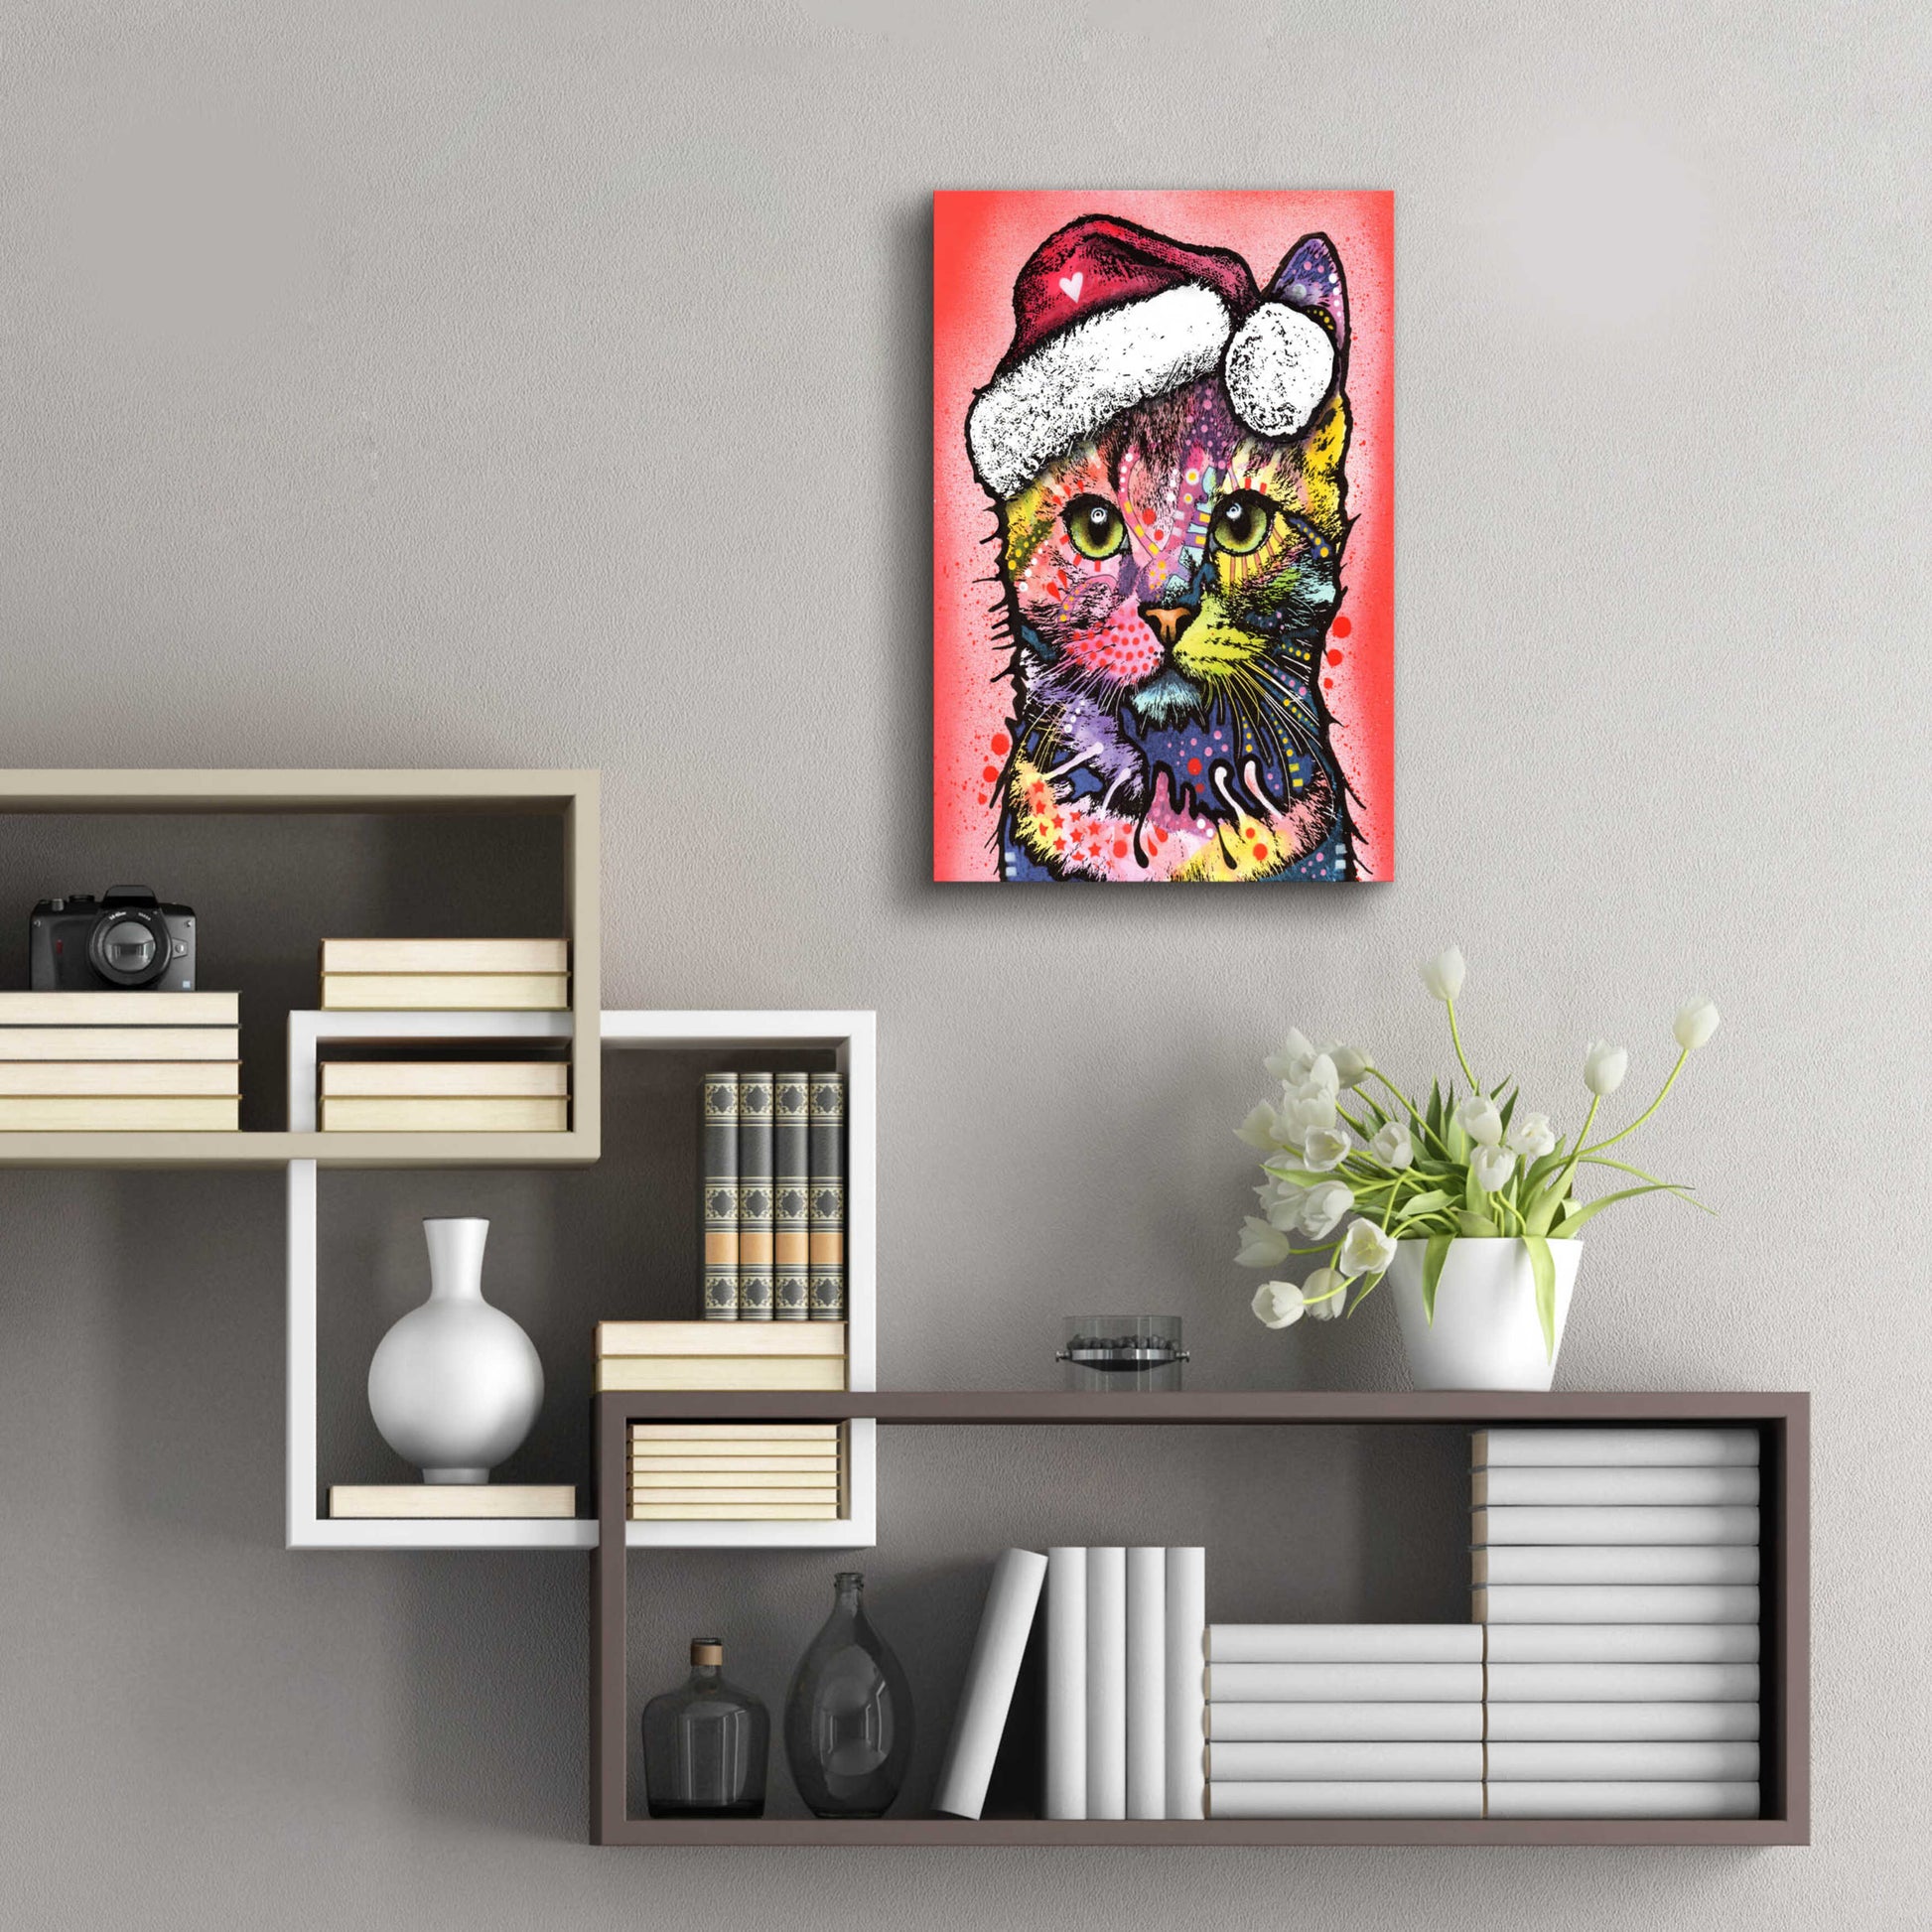 Epic Art 'Christmas Cat' by Dean Russo, Acrylic Glass Wall Art,16x24